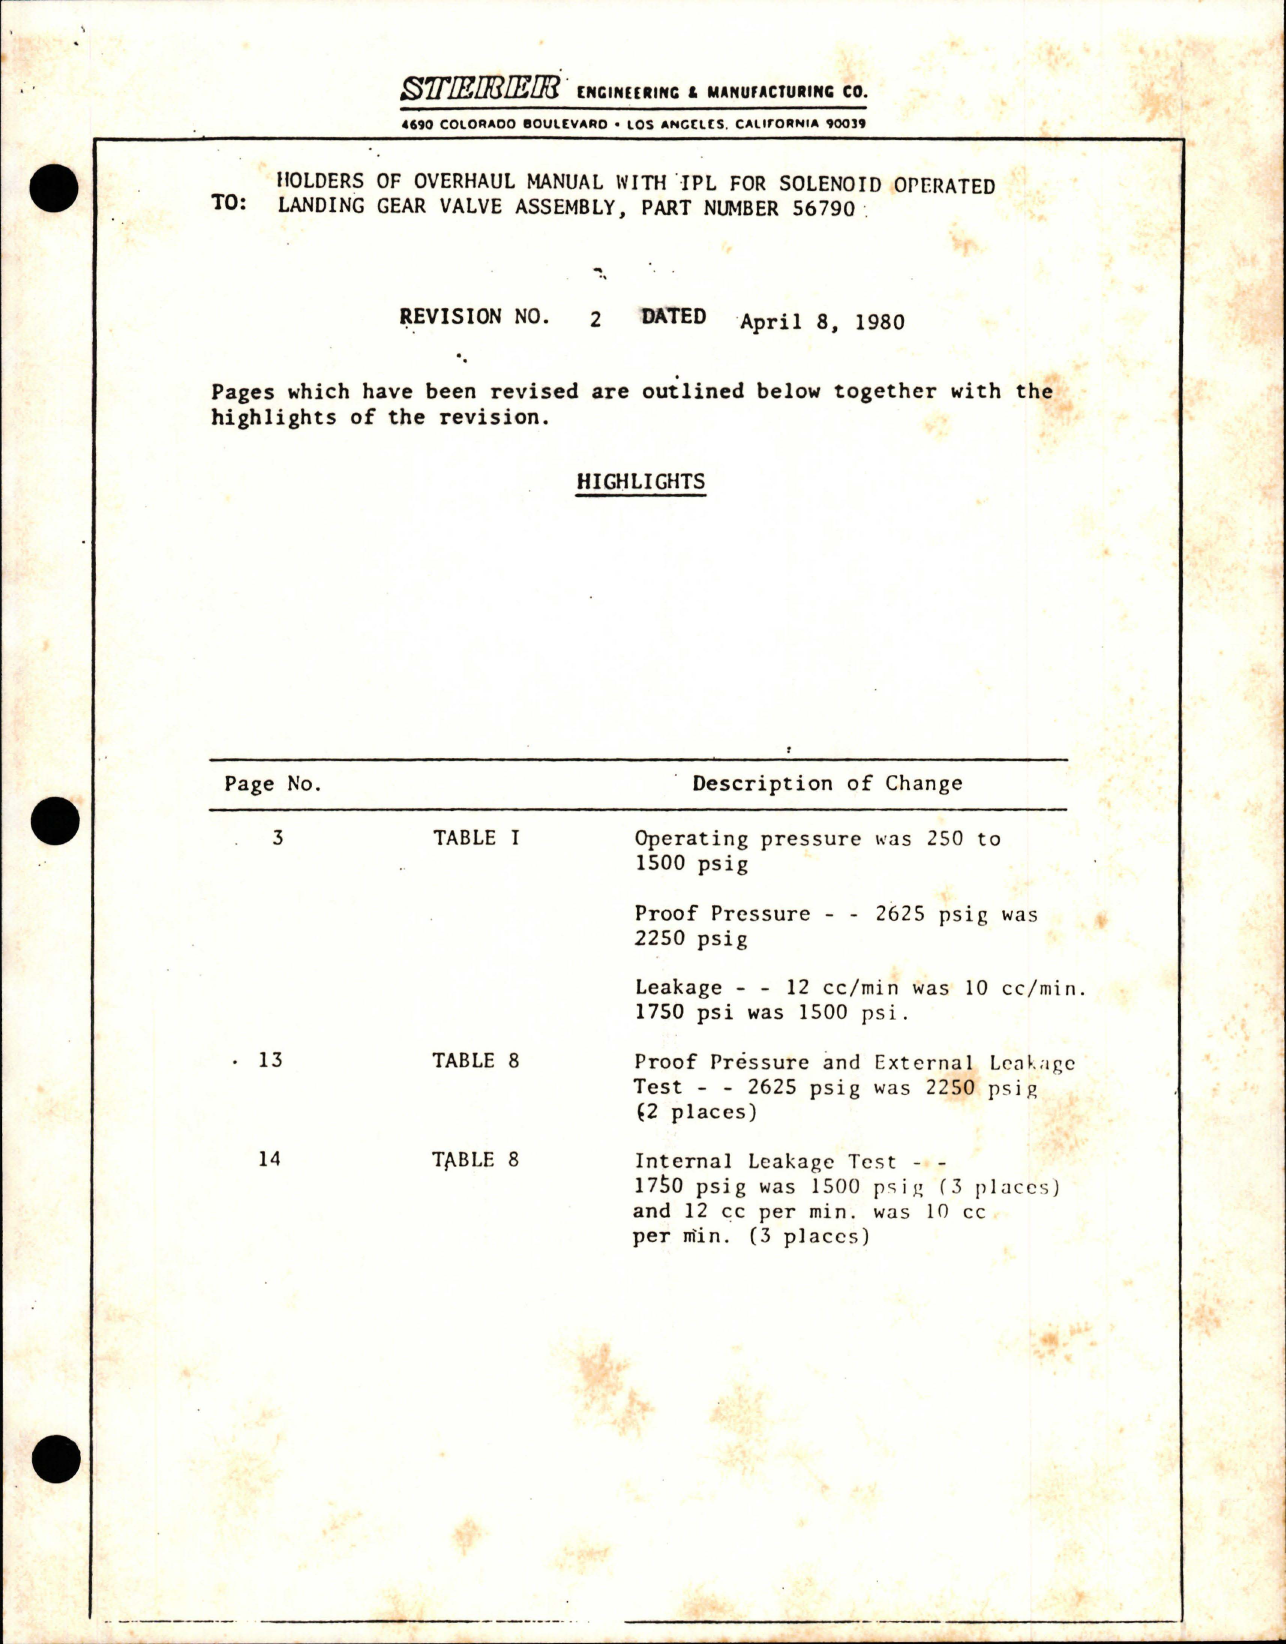 Sample page 5 from AirCorps Library document: Overhaul with Illustrated Parts List for Solenoid Operated Landing Gear Valve Assembly - Part 56790